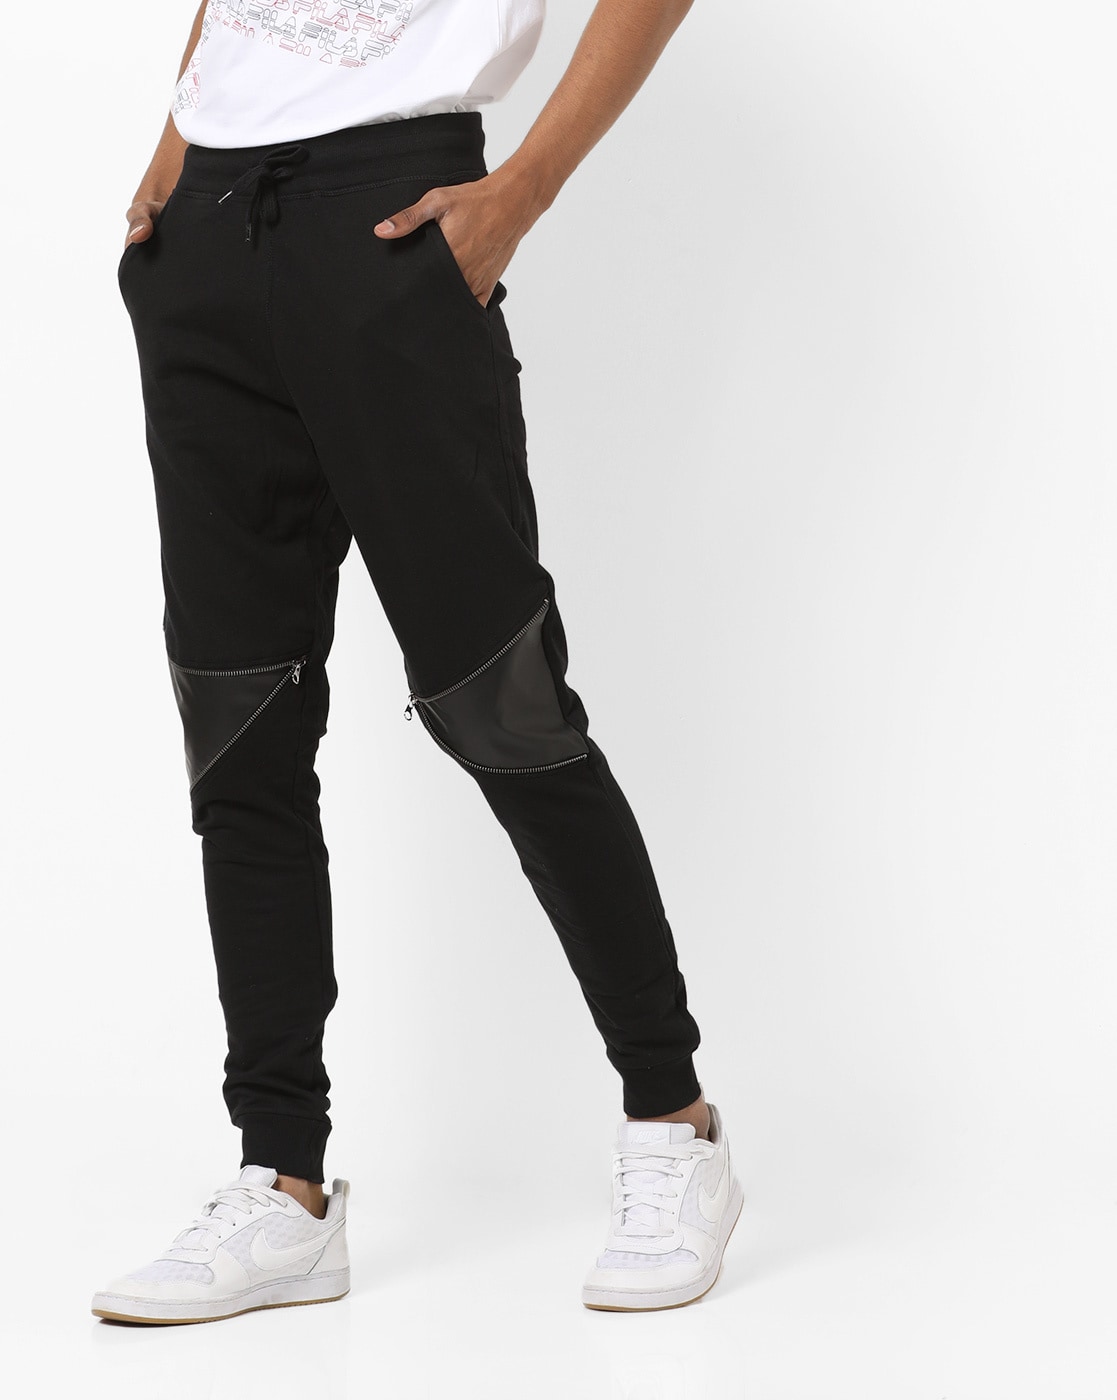 Mens Black Leather Joggers ChersDelights Leather Apparel